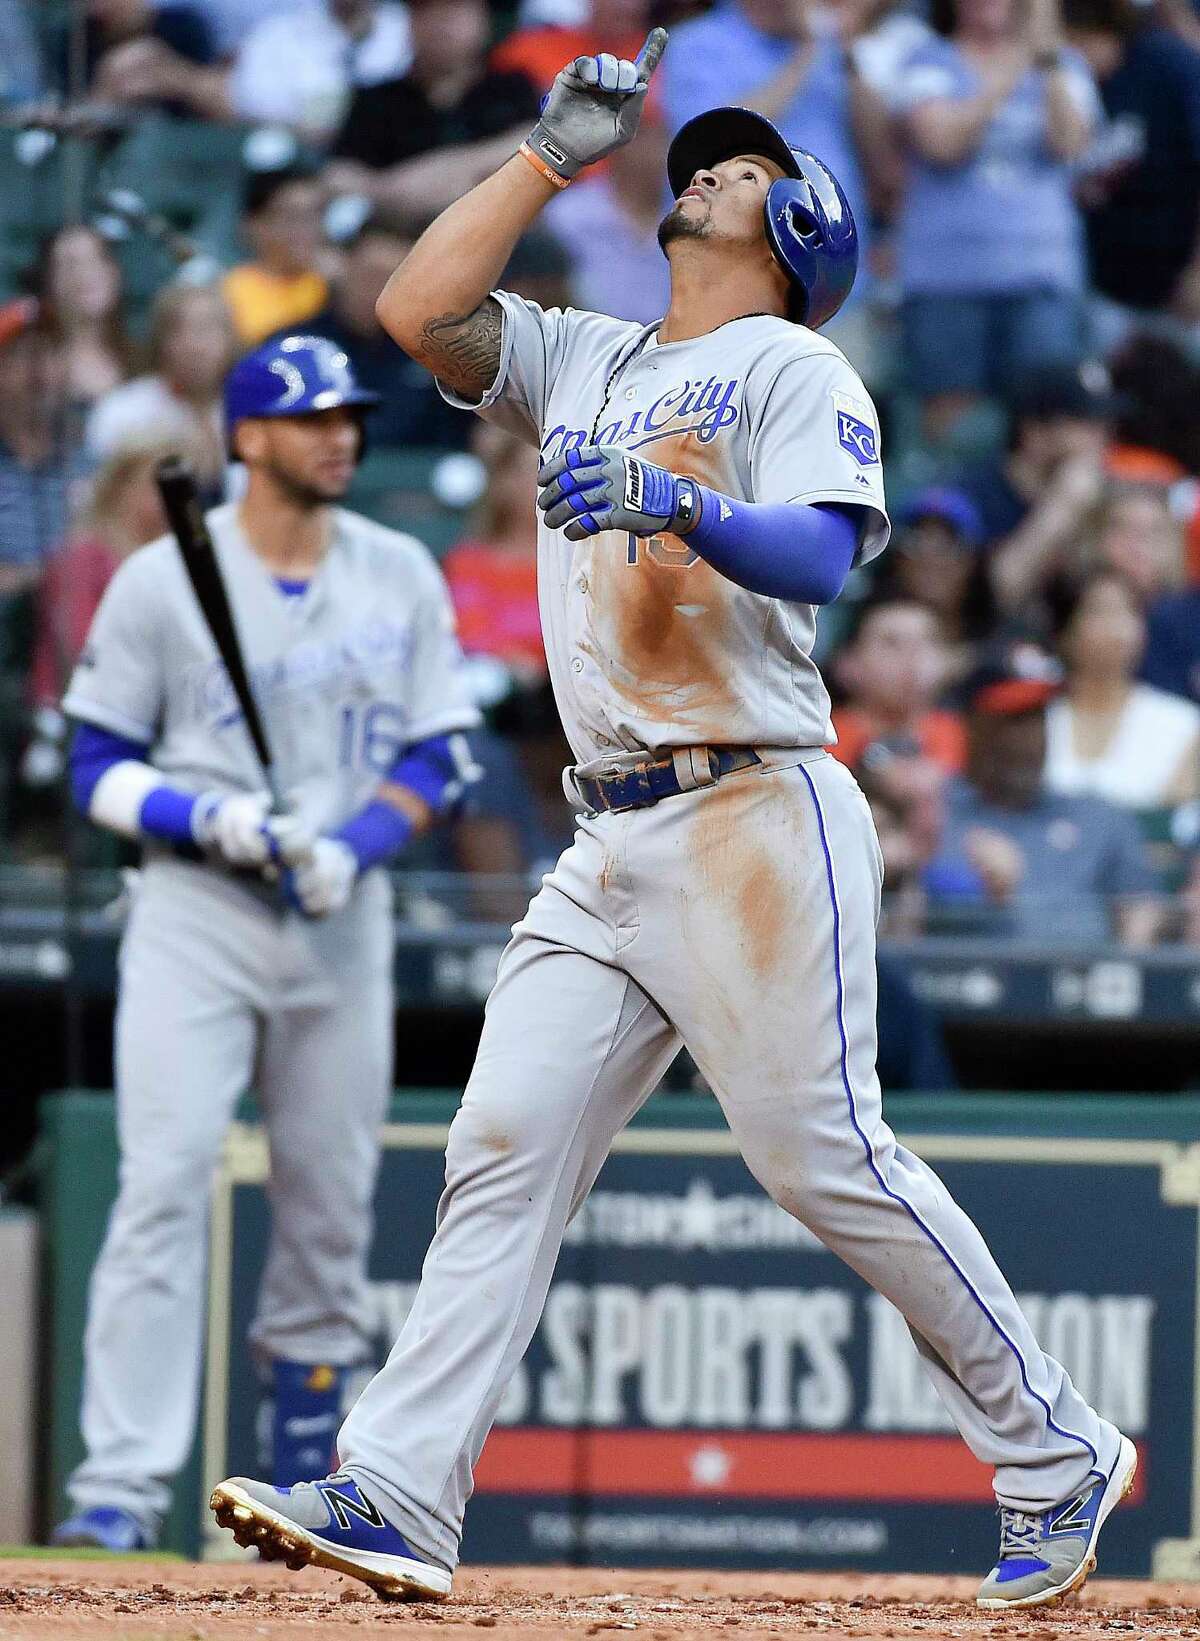 Kansas City Royals' Cheslor Cuthbert celebrates his solo home run off Houston Astros starting pitcher Dallas Keuchel during the fifth inning of a baseball game, Saturday, April 8, 2017, in Houston. (AP Photo/Eric Christian Smith)